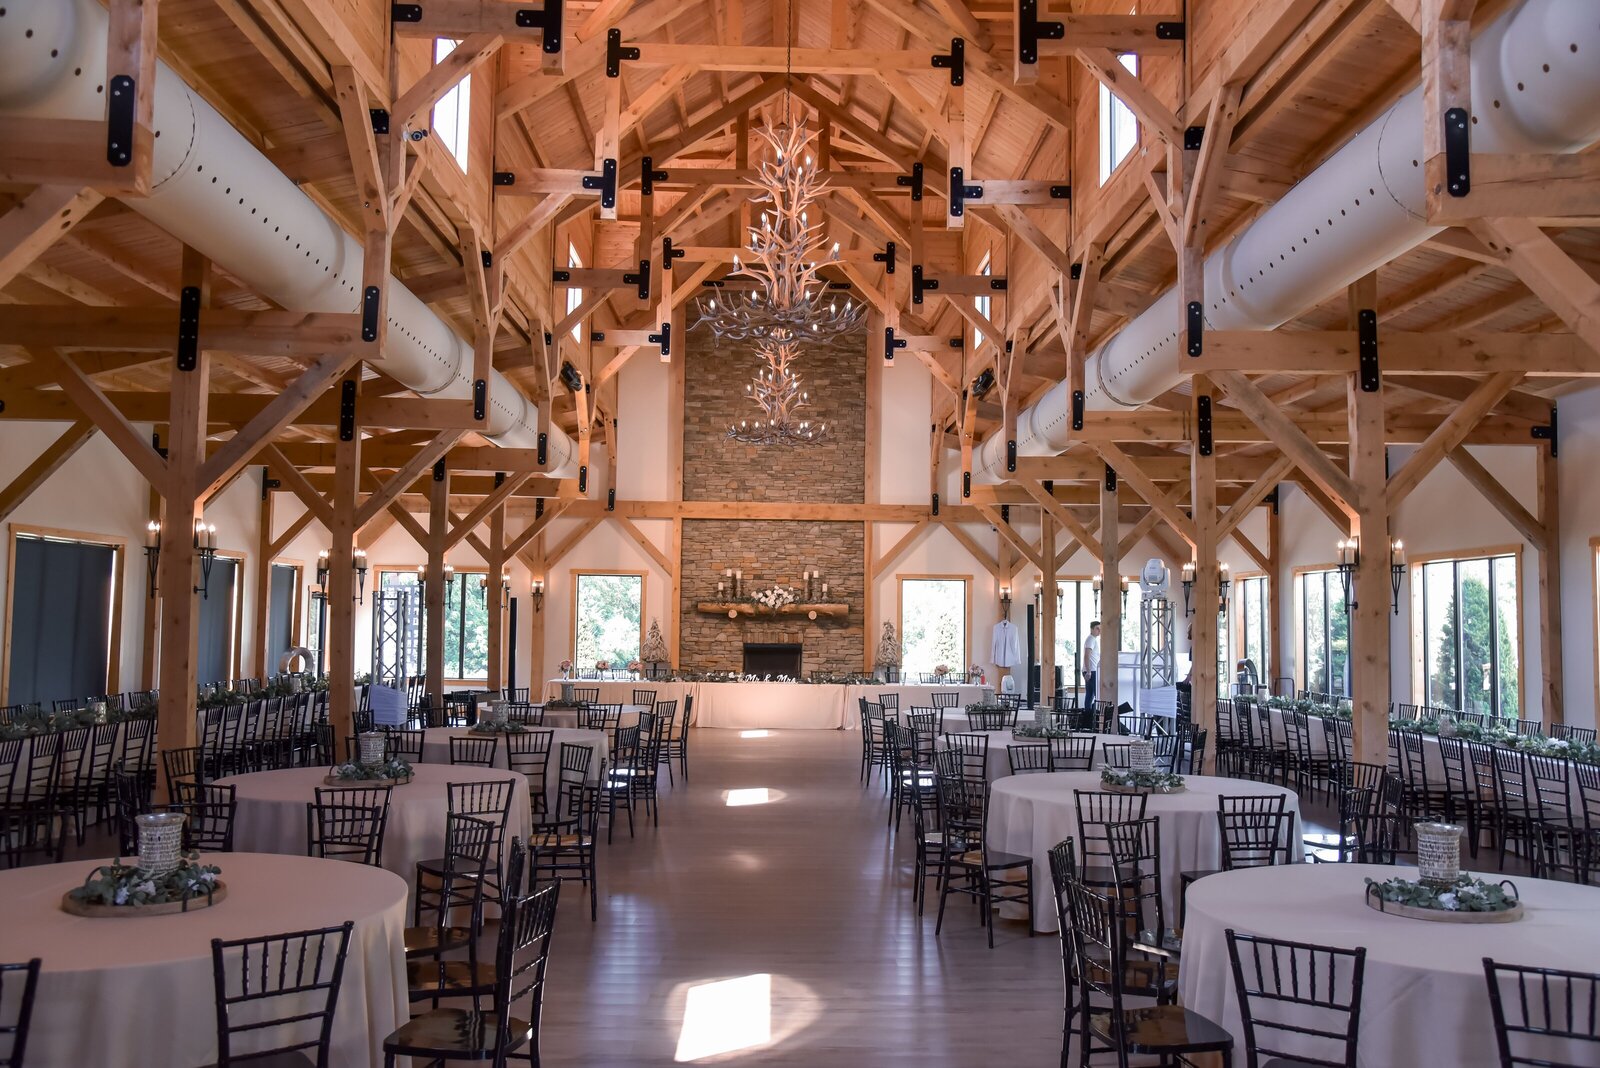 Kansas City Wedding Venue with on site accommodations